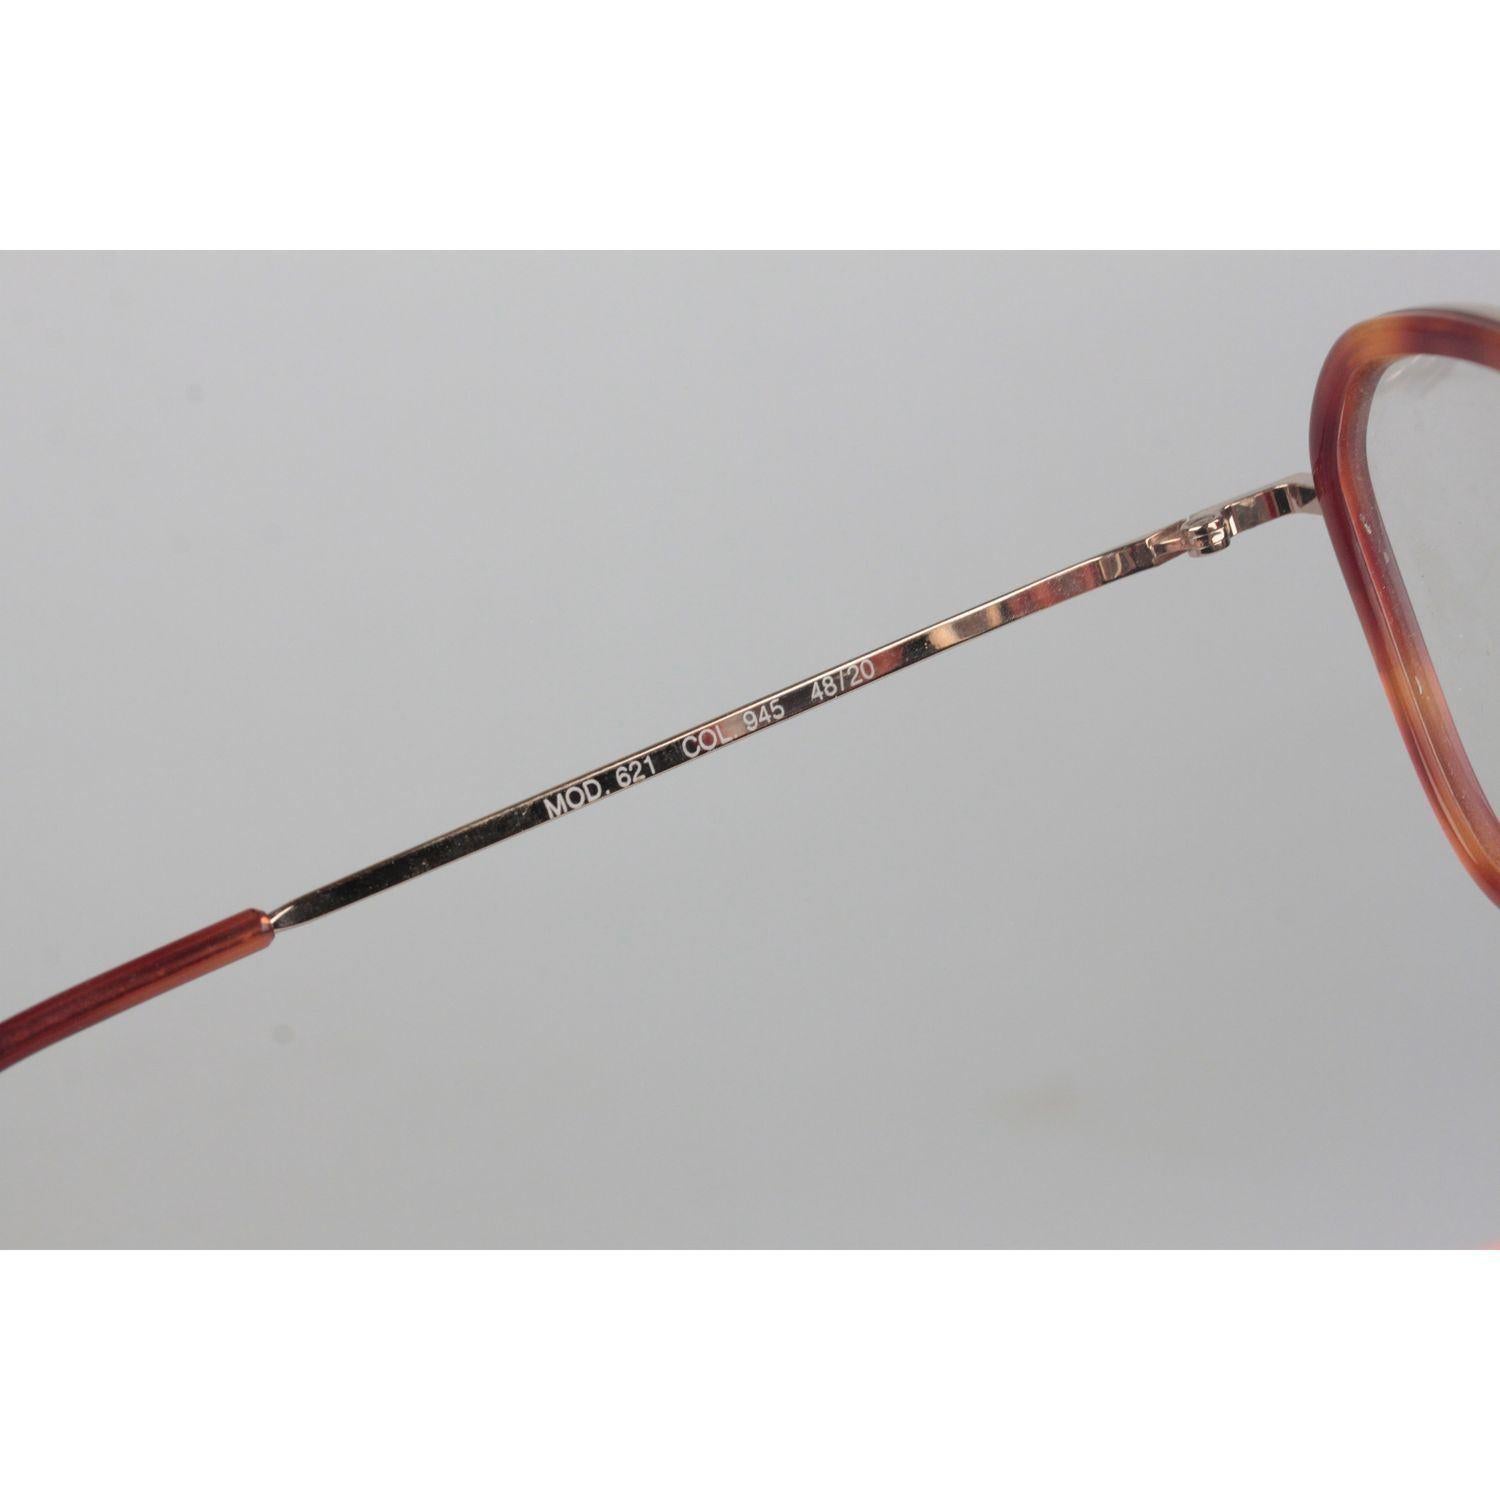 Material: Metal, Acetate Color: Brown, Gold Model: 621 Gender: Womens Condition Details:New or Never Worn. NOS (NEW OLD STOCK) - They will come with a GENERIC case. Measurements: TEMPLE MAX. LENGTH: 135 mm TEMPLE TO TEMPLE - MAX WIDTH: 135 mm EYE /